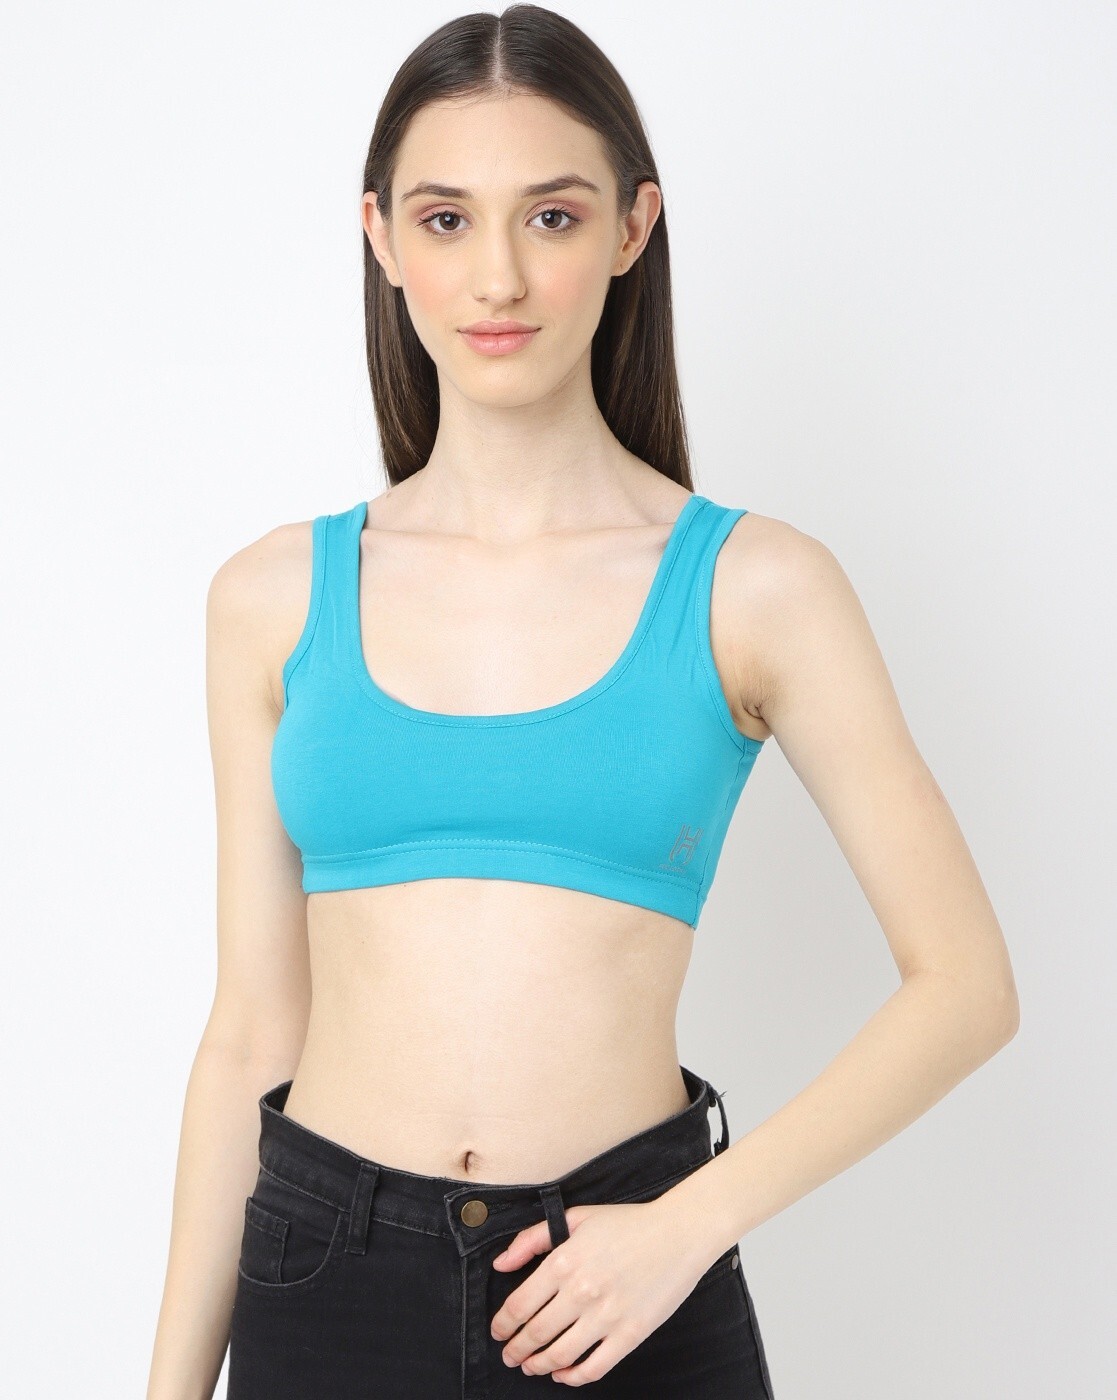 Pack of 3 Compression Sports Bras